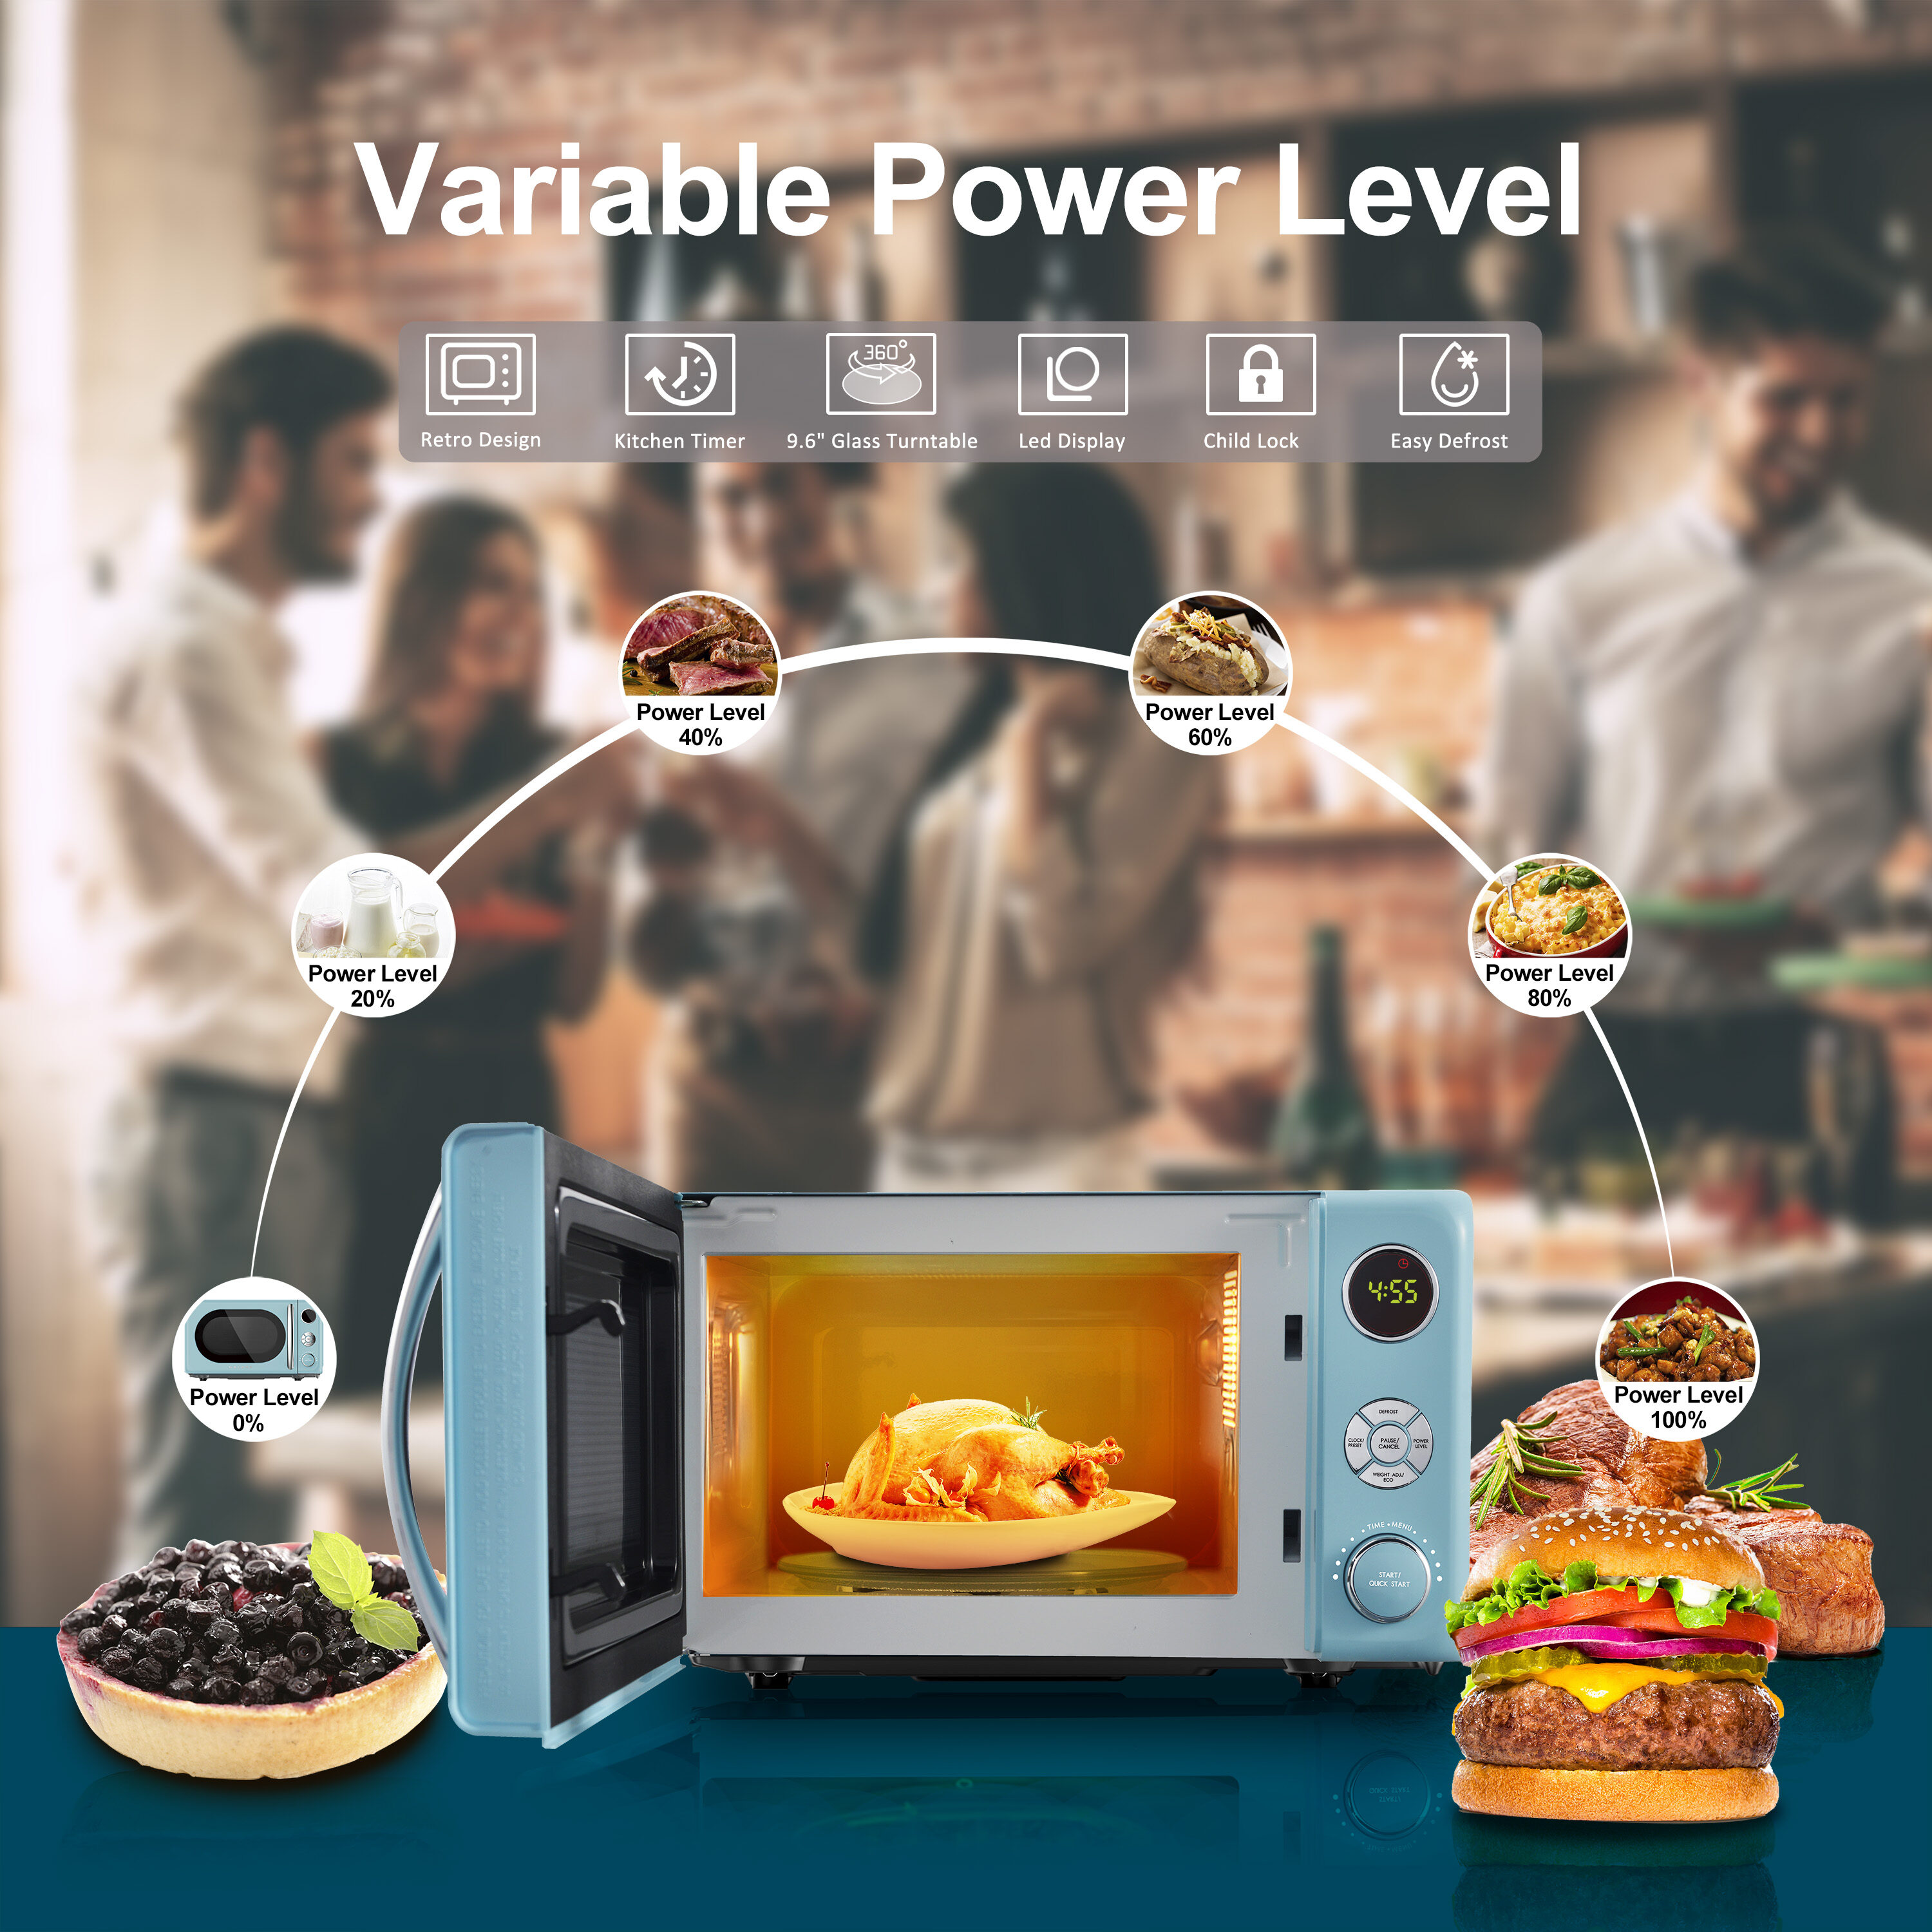 Microwave Oven 0.7 Cu.Ft, Mini Microwave Oven with 9.6'' Removable Turntable